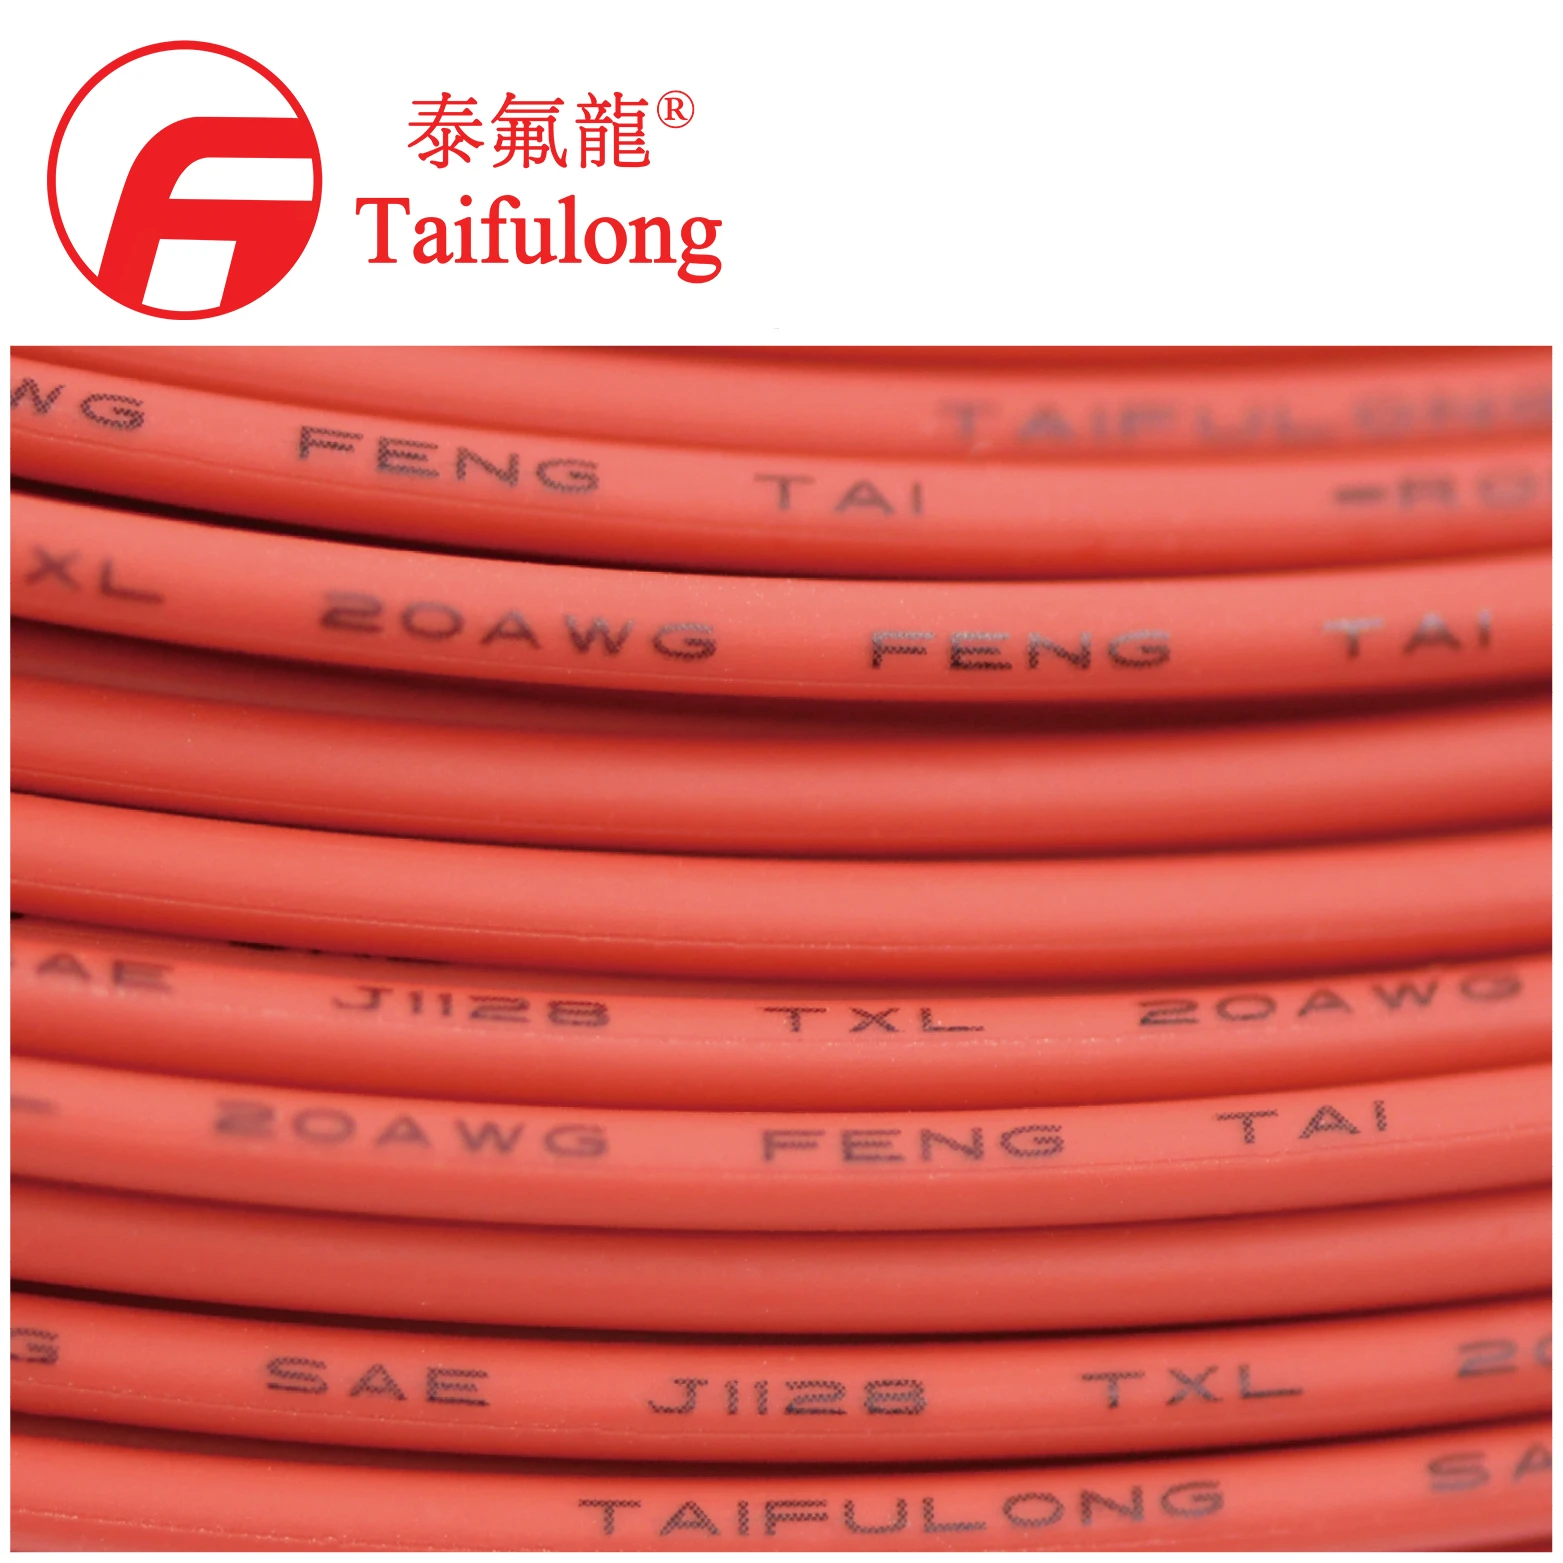 Hot sale TAIFULONG XLPO SAE-TXL  22AWG 125C  60V Tinned copper wire Electric wire manufacturer Automotive electronic cables